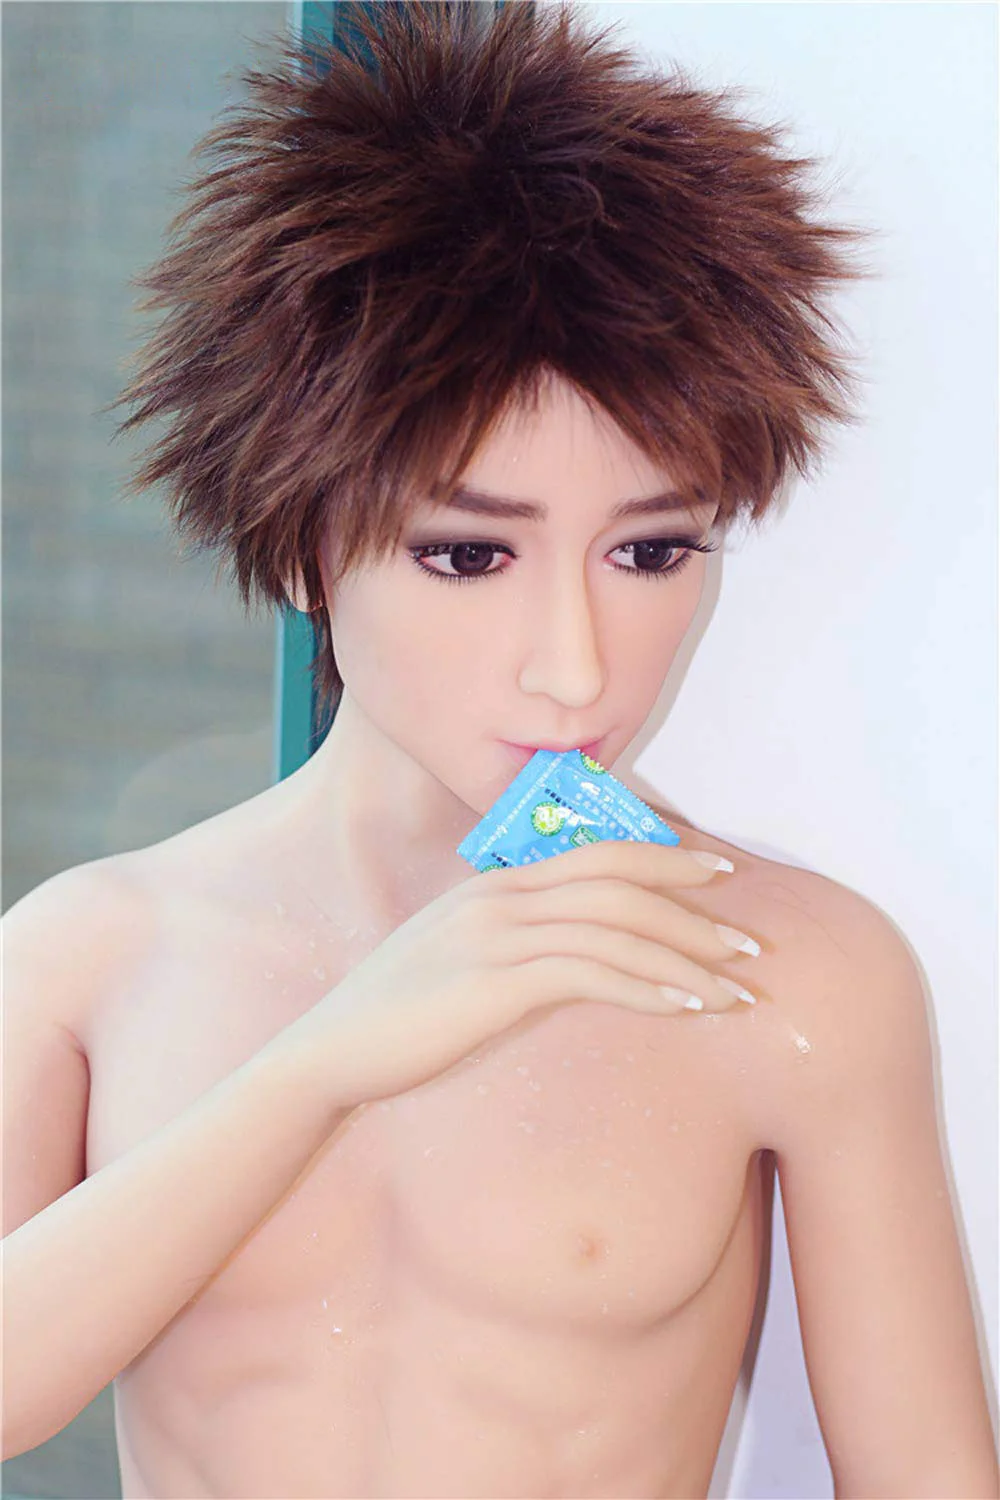 Male-sex-doll-with-condom-in-his-mouth